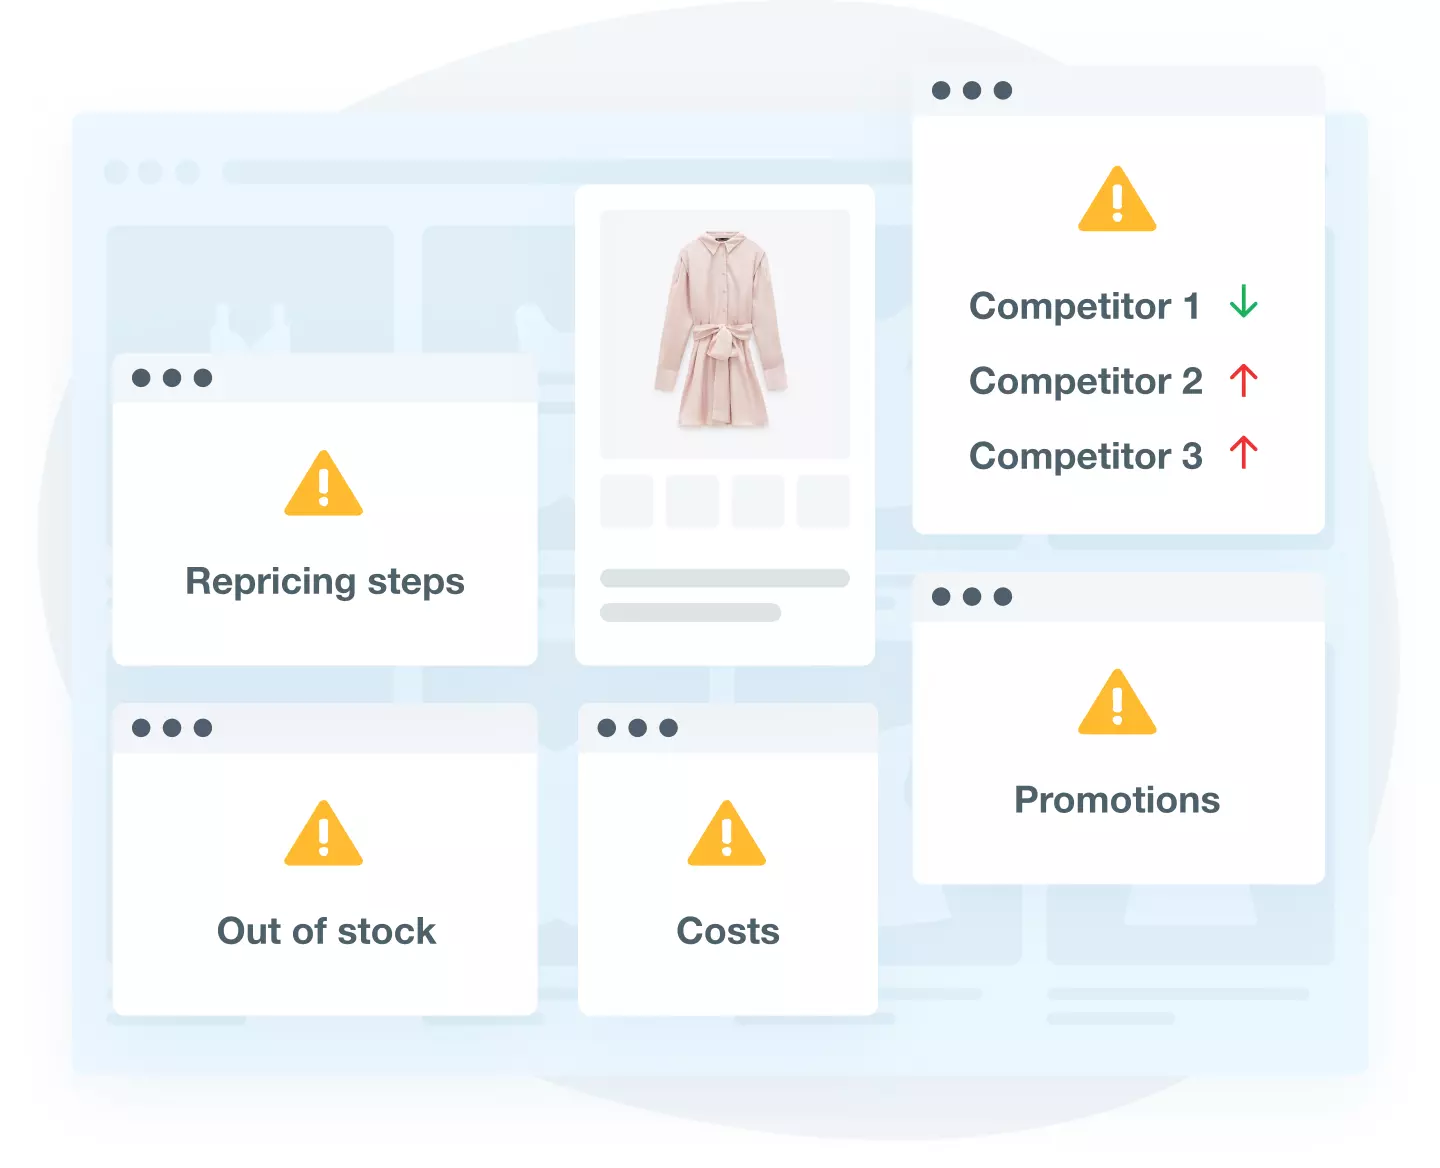 Make pricing transparent for every stakeholder